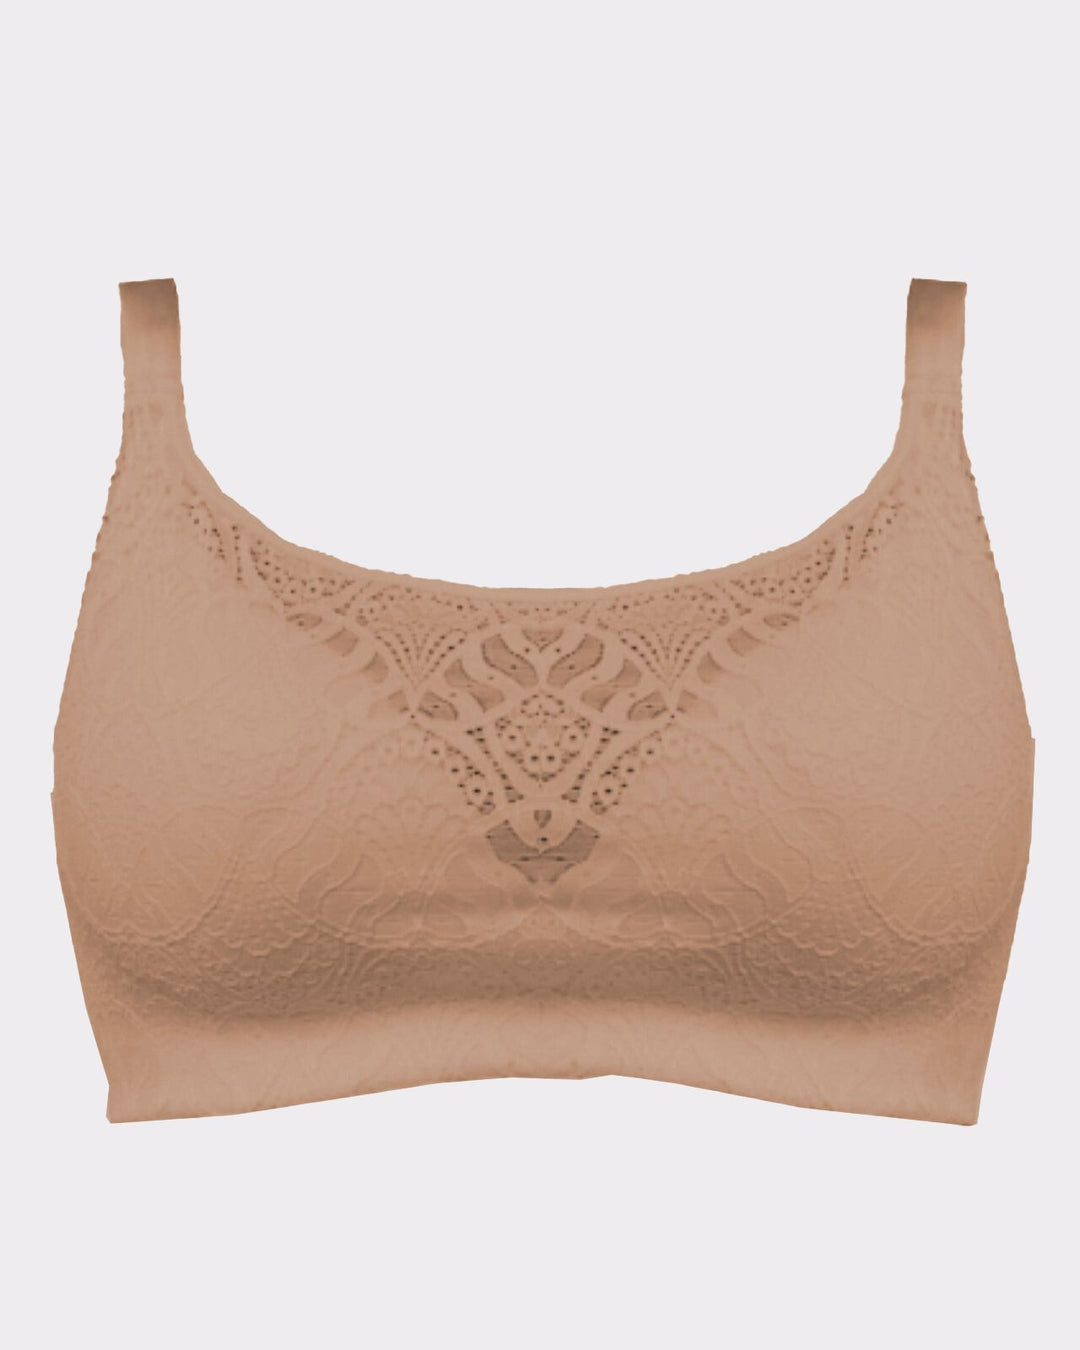 AnaOno Carrie Pocketed Lace Molded Cup Bra